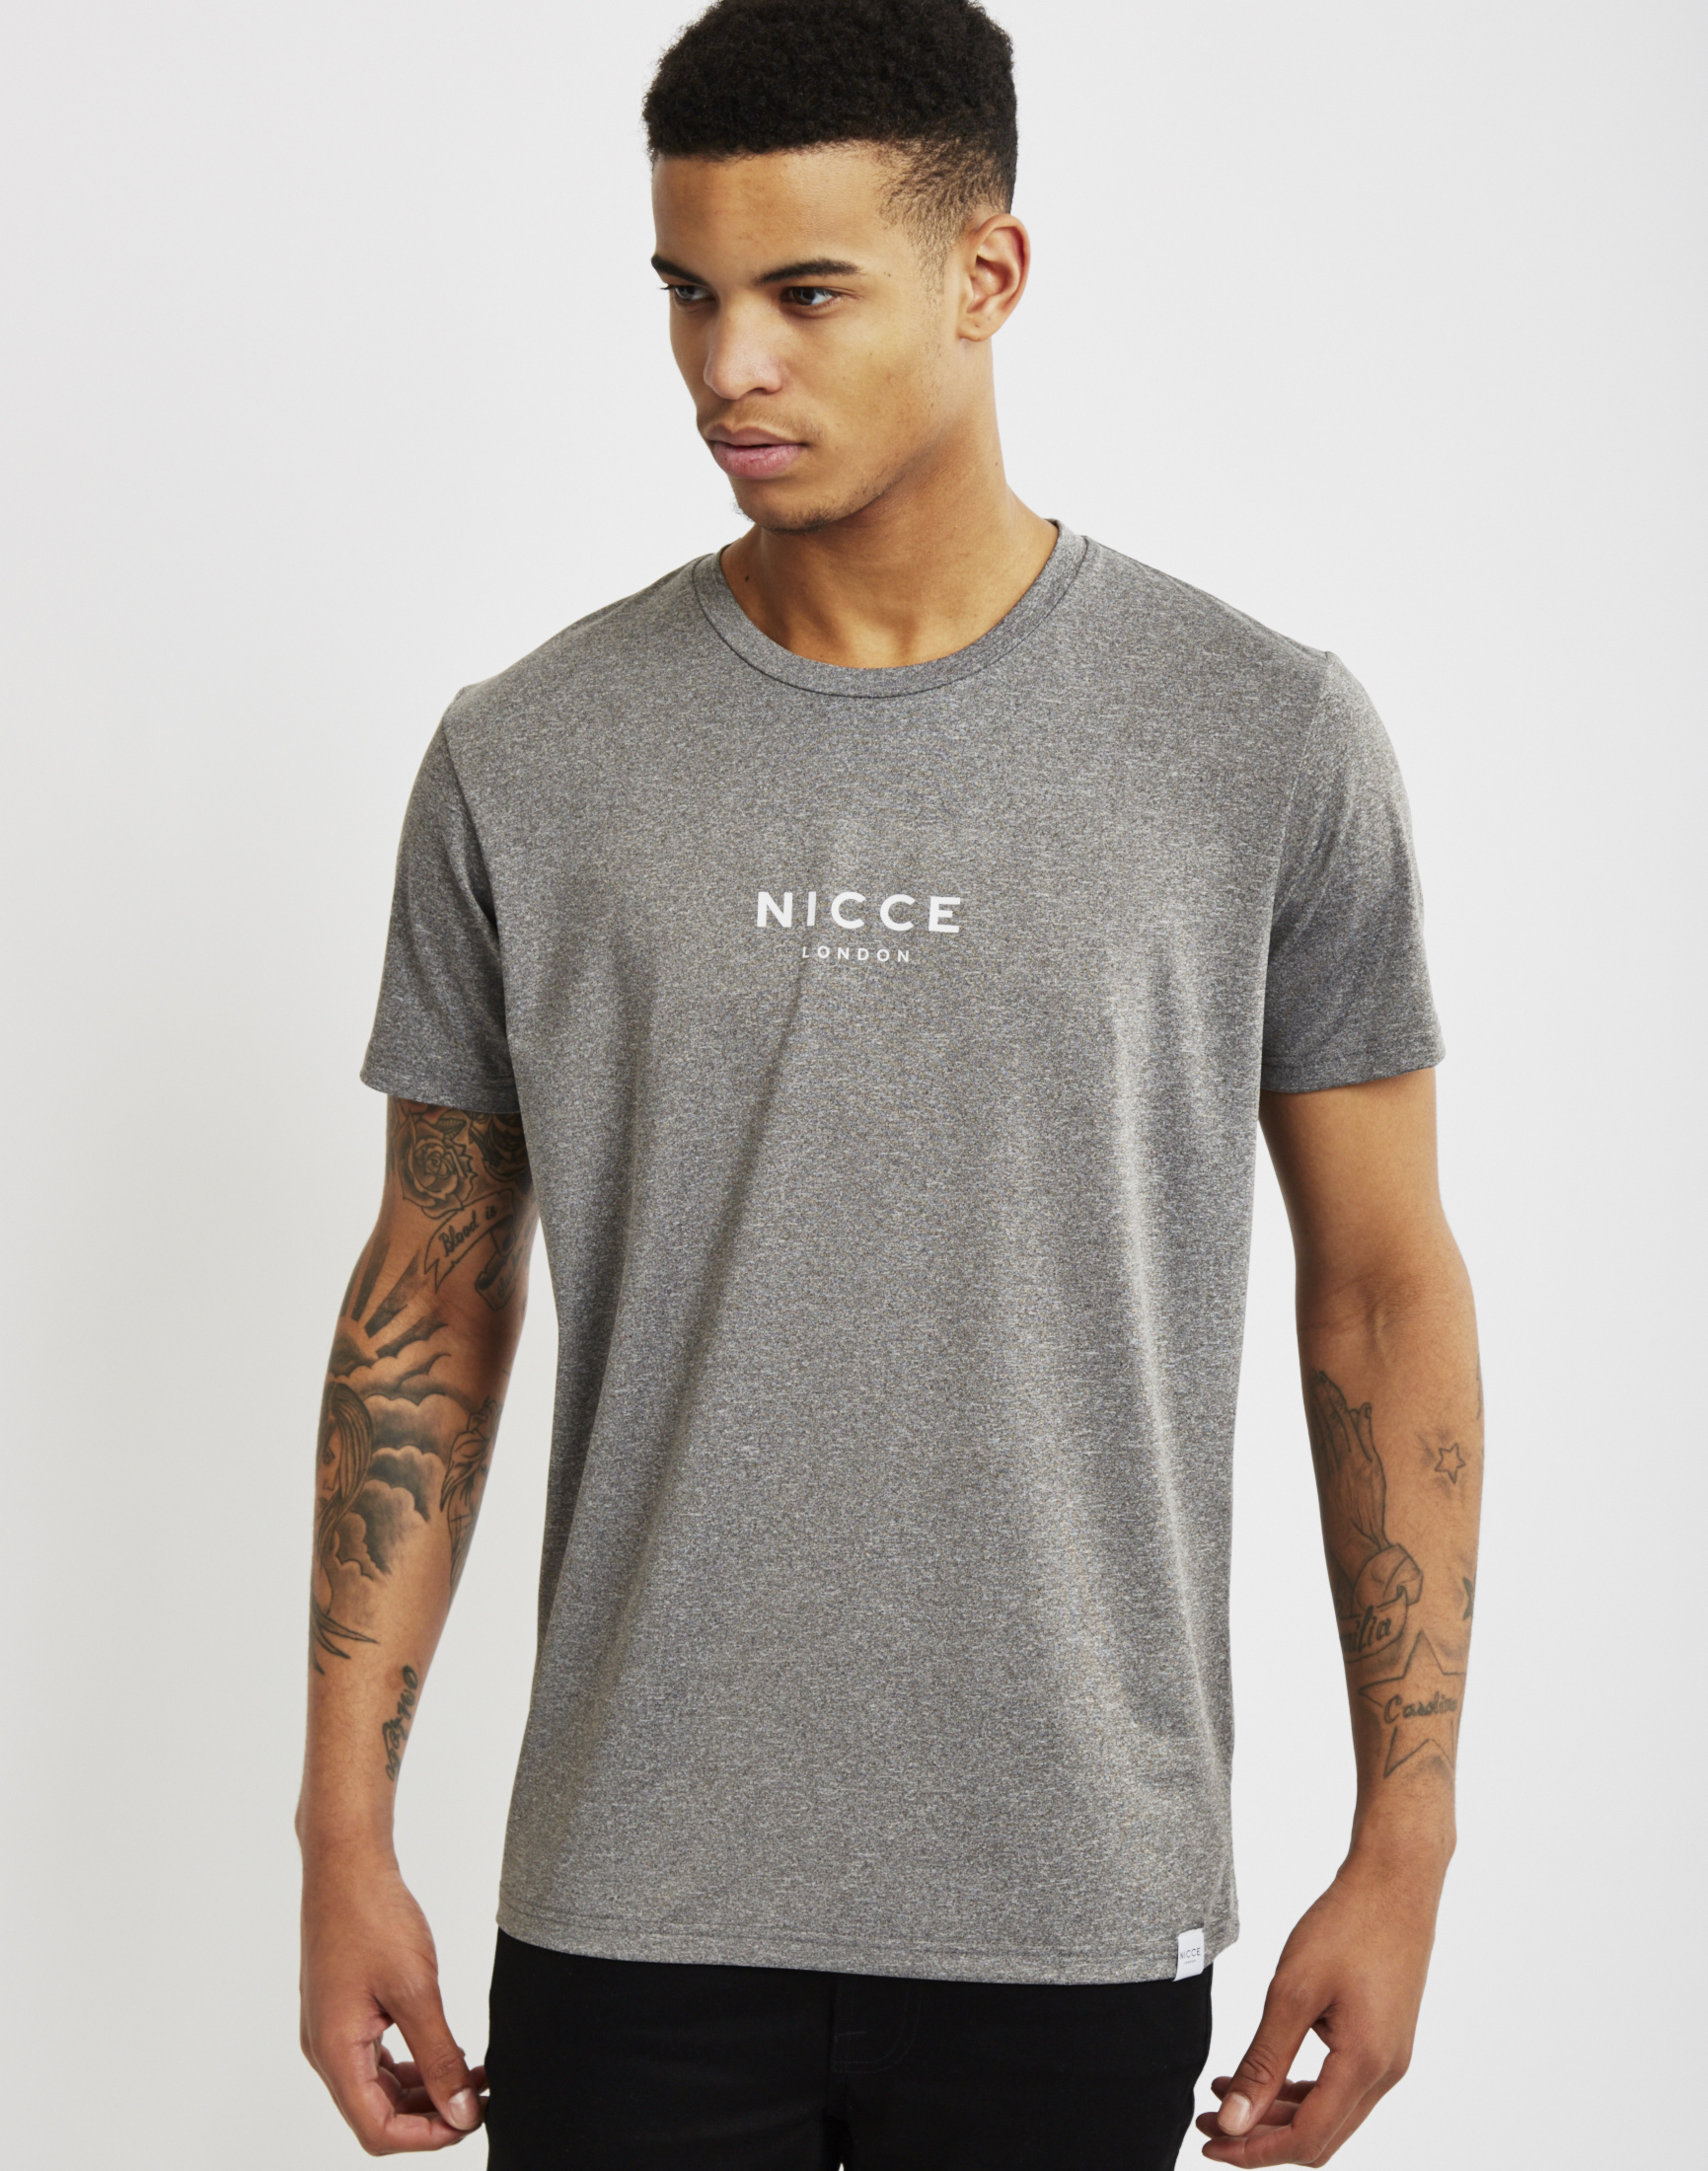 Lyst - Nicce London Poly Tech T-shirt Grey in Gray for Men